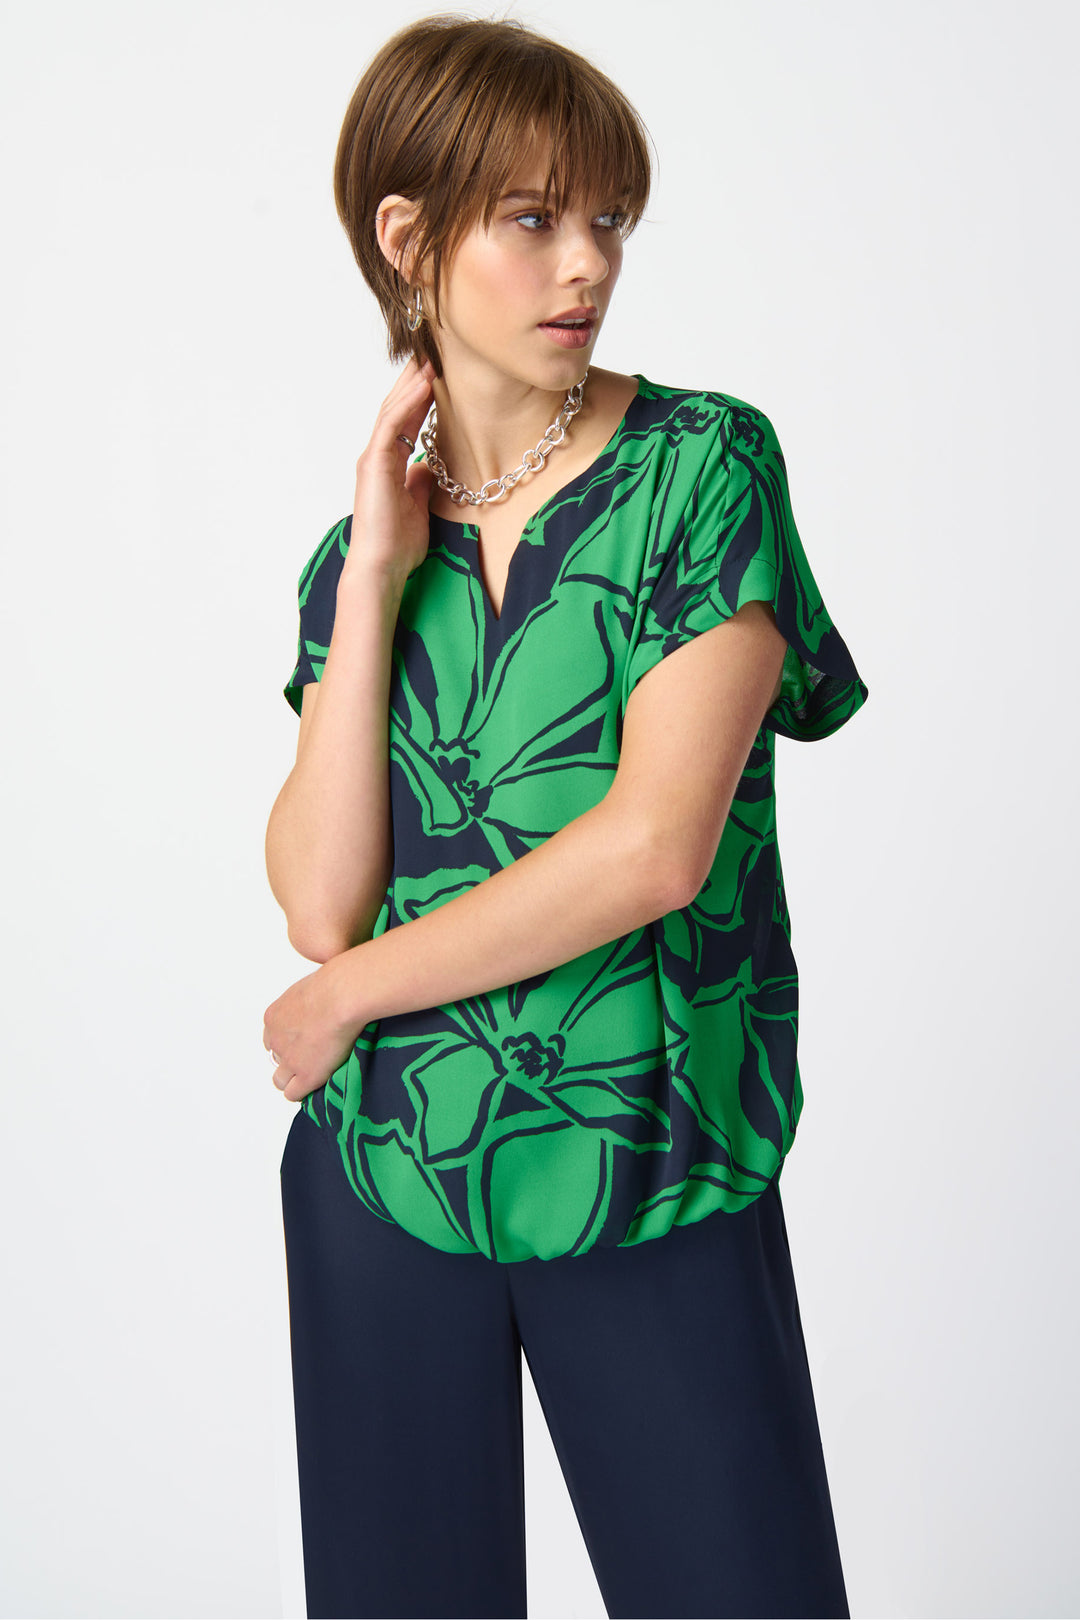 The round neckline is split, adding a unique detail to this chic top.